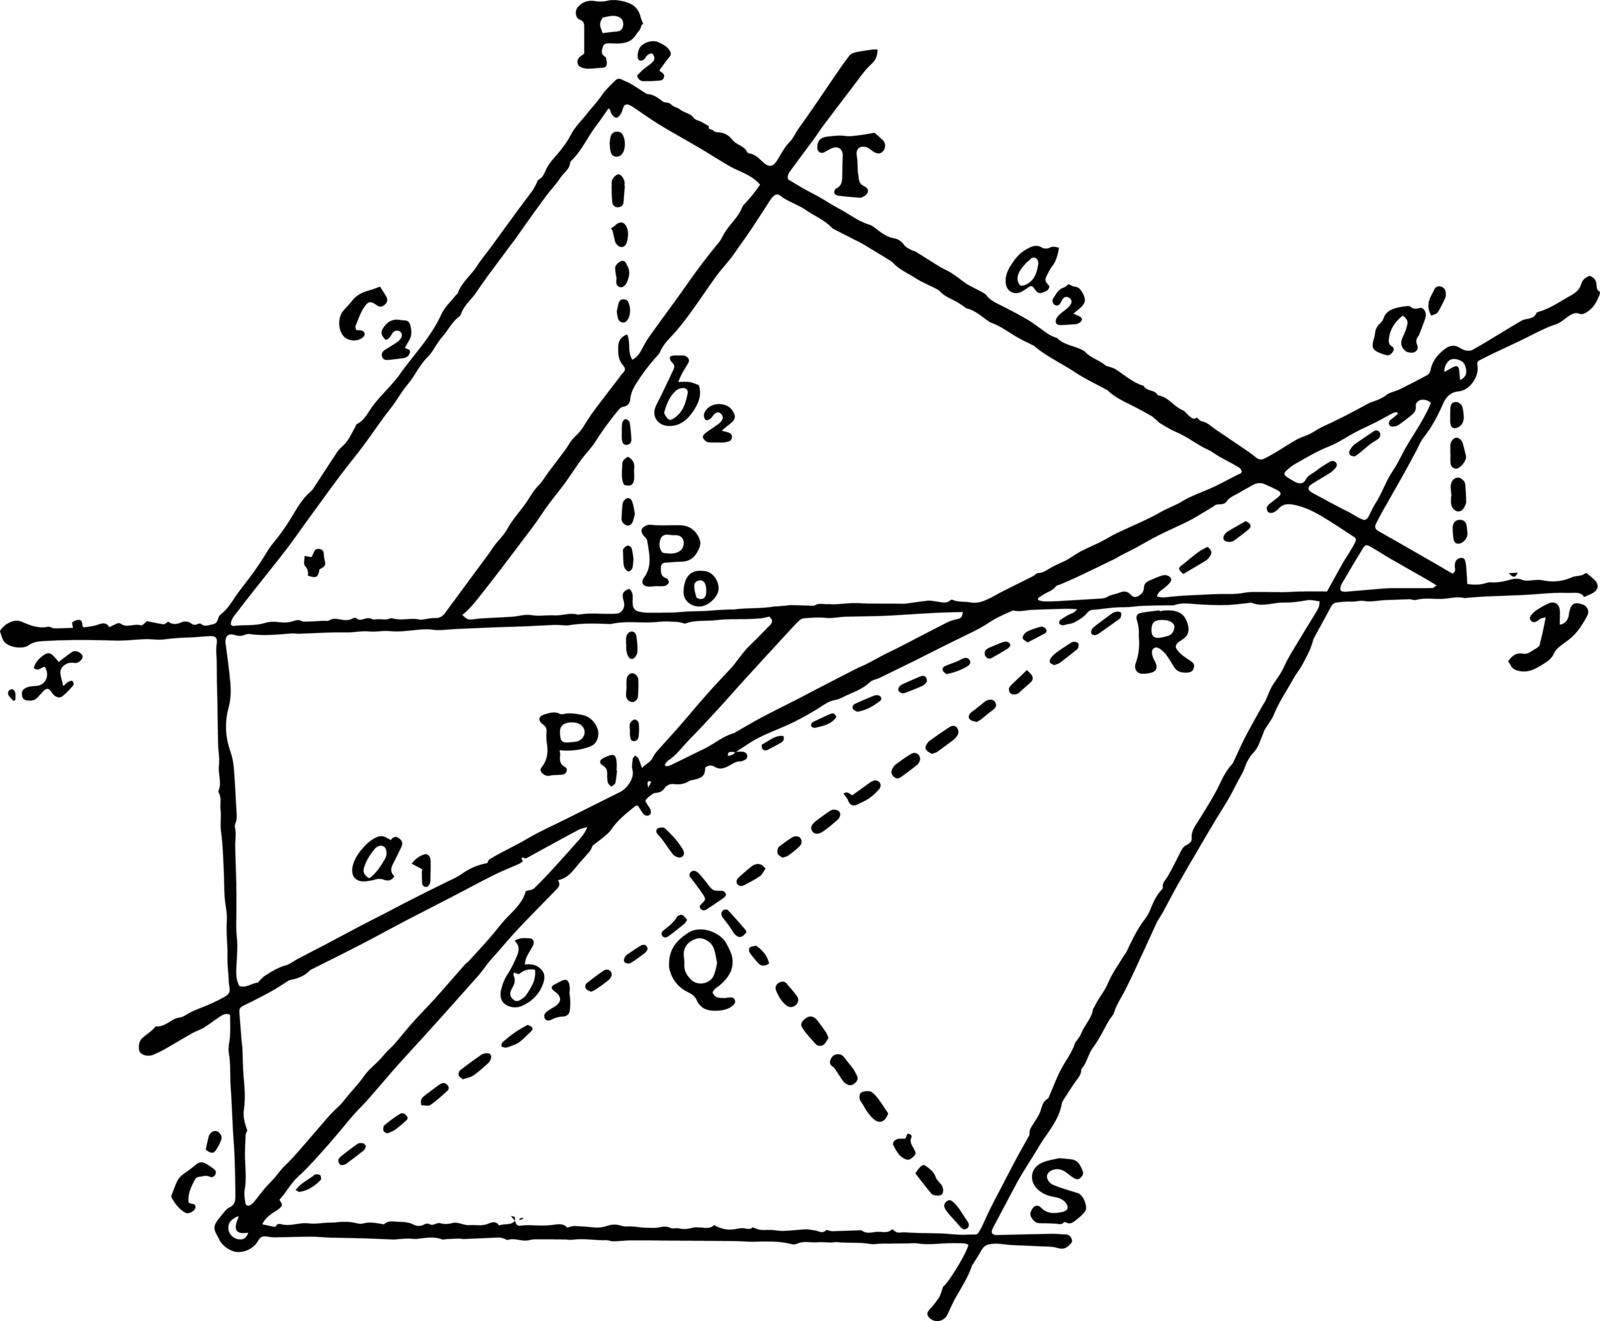 Also, when two lines intersect, they form two pairs of equal angles, vintage line drawing or engraving illustration.